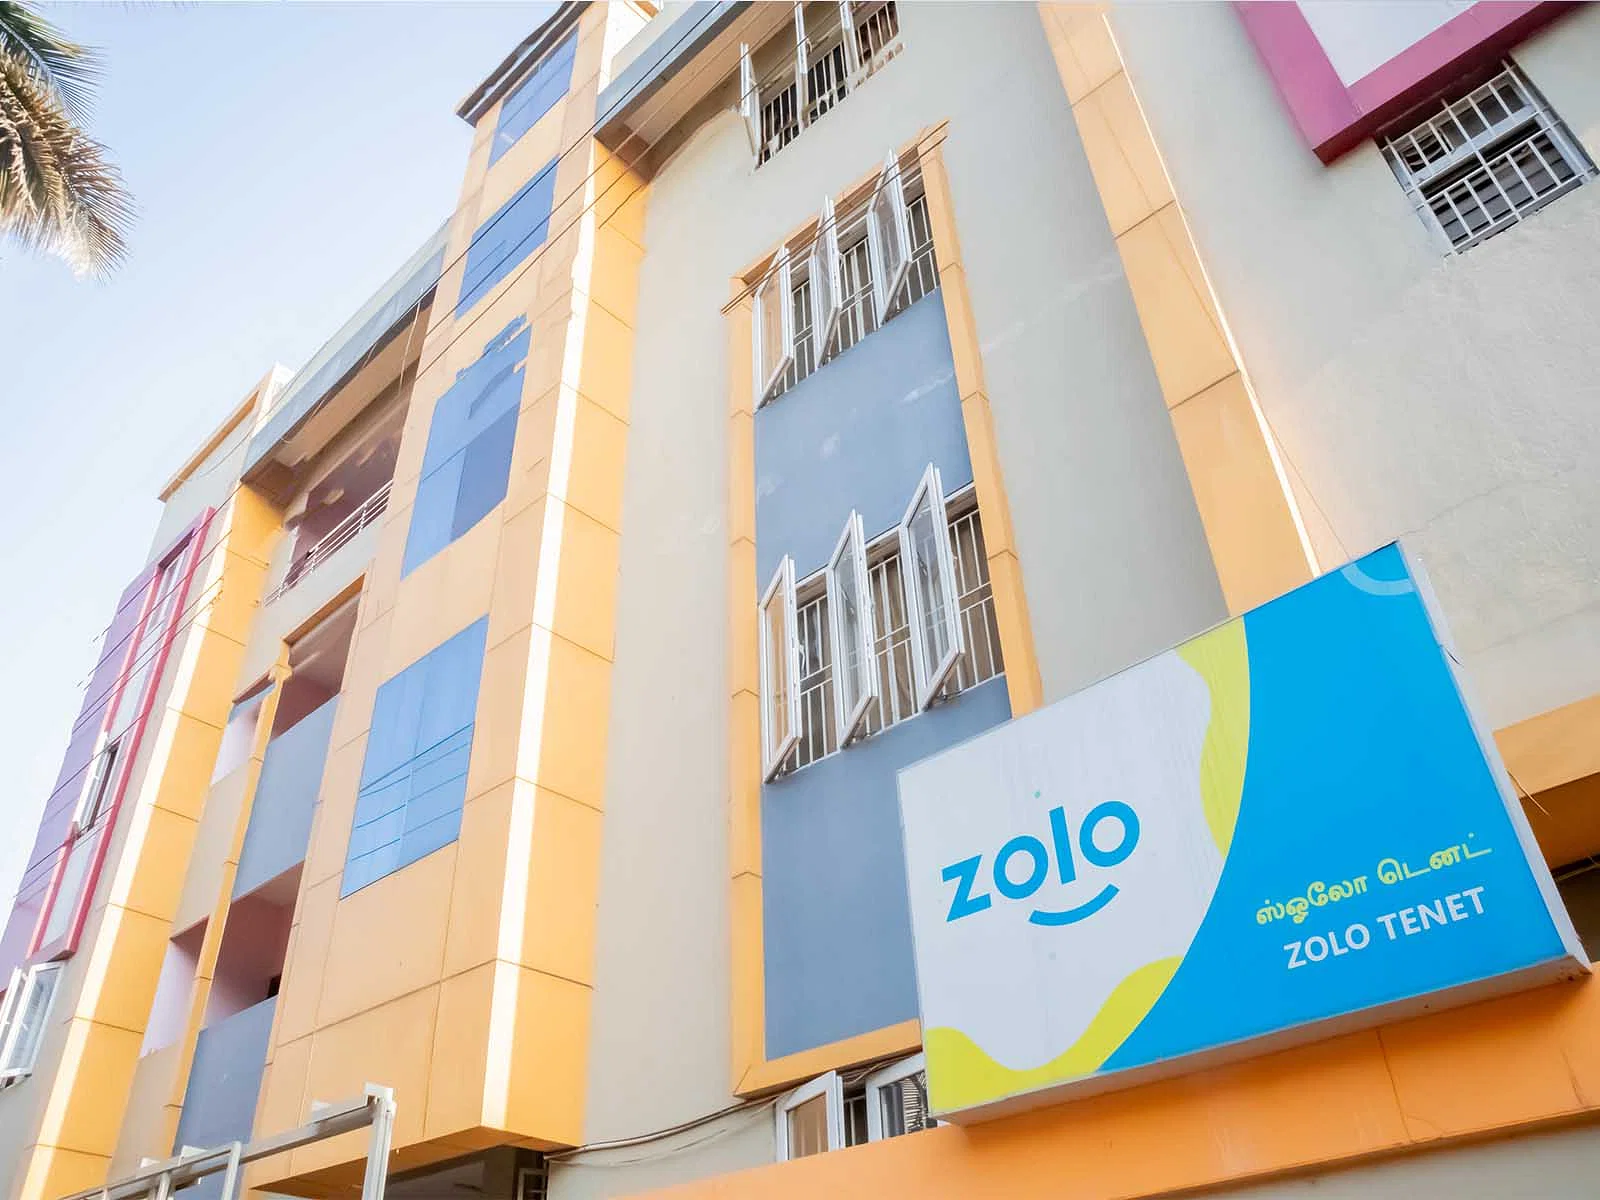 safe and affordable hostels for couple students with 24/7 security and CCTV surveillance-Zolo Tenet